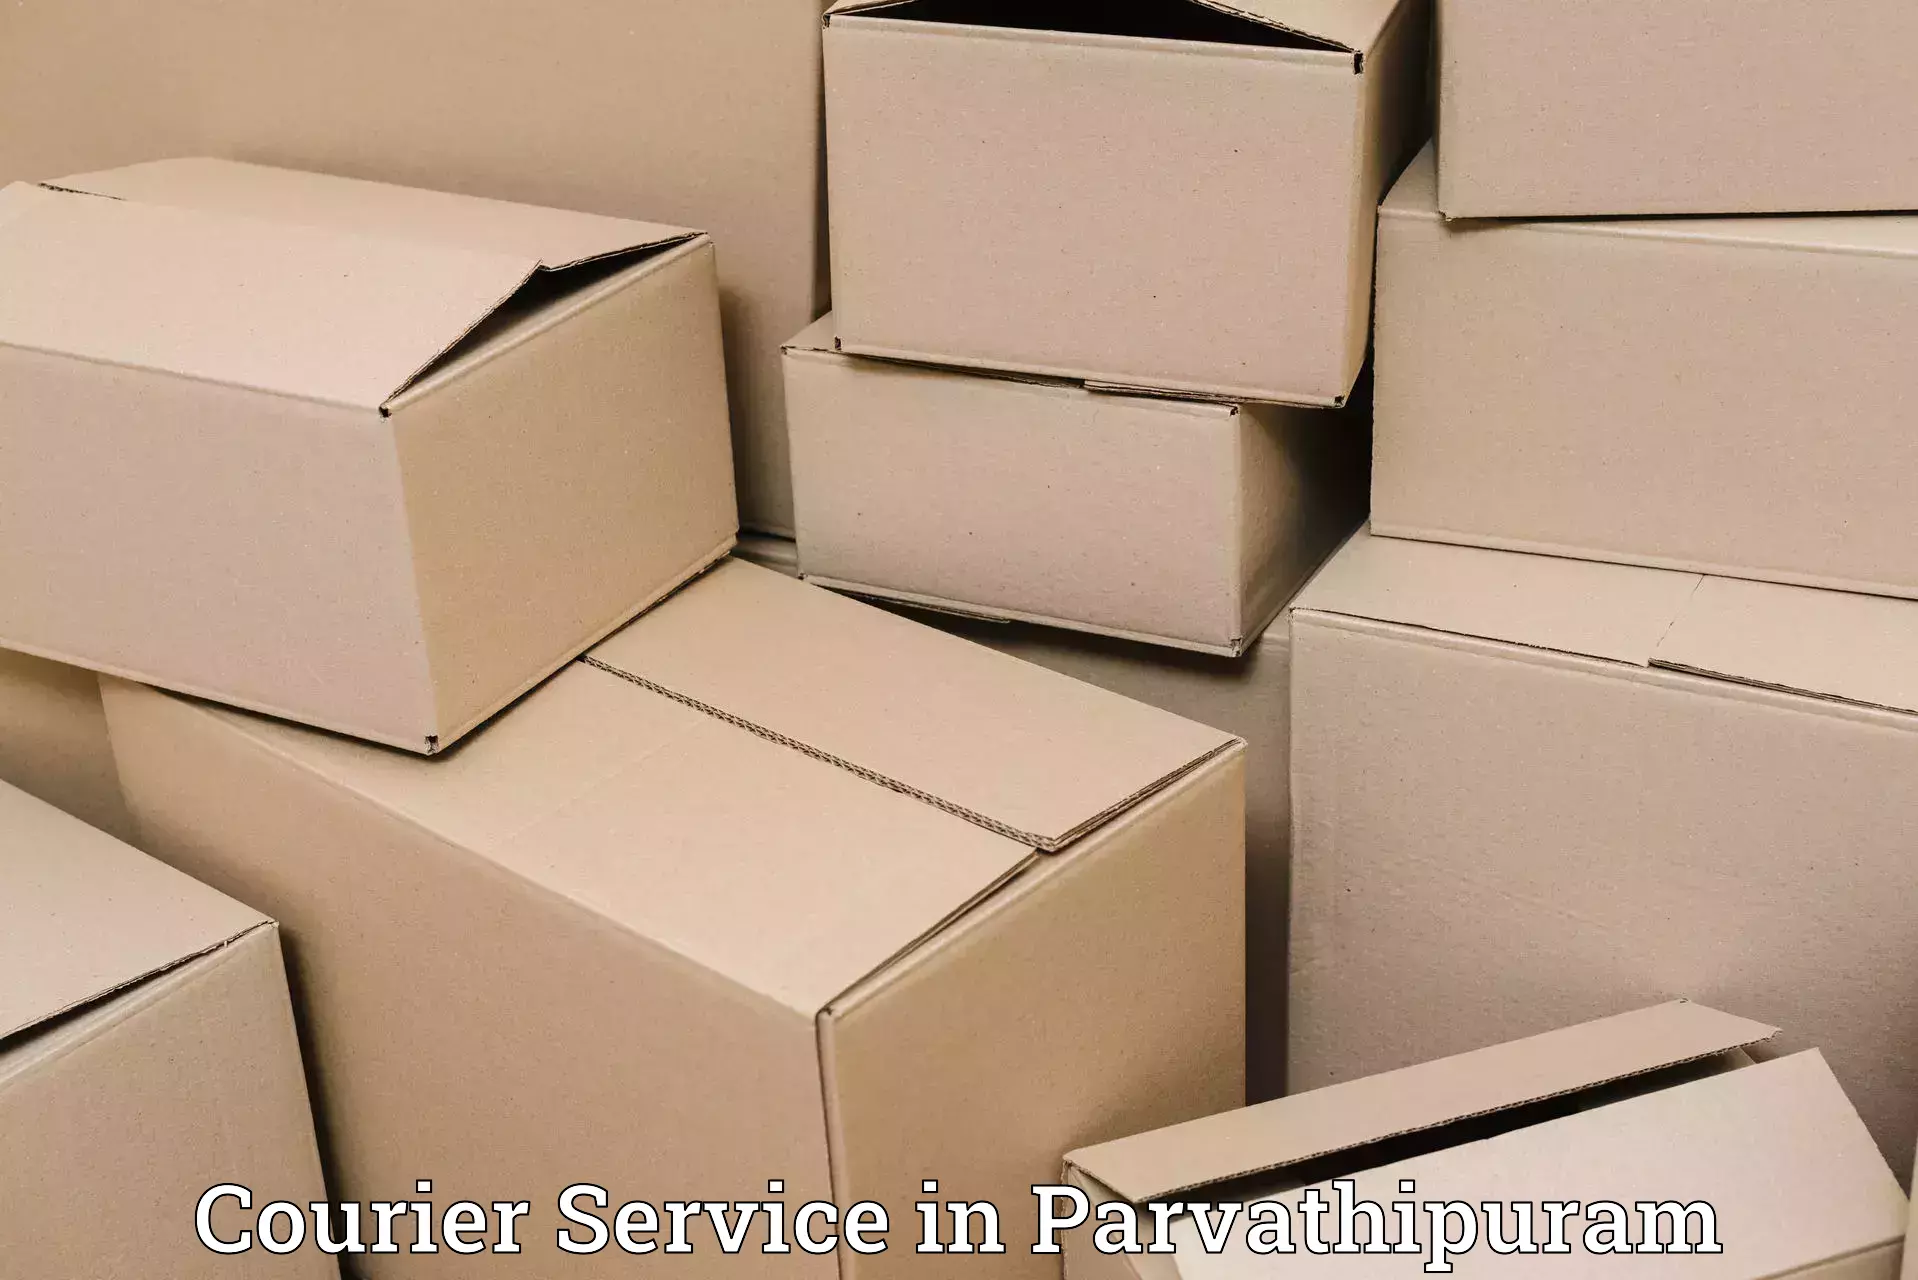 High-capacity shipping options in Parvathipuram